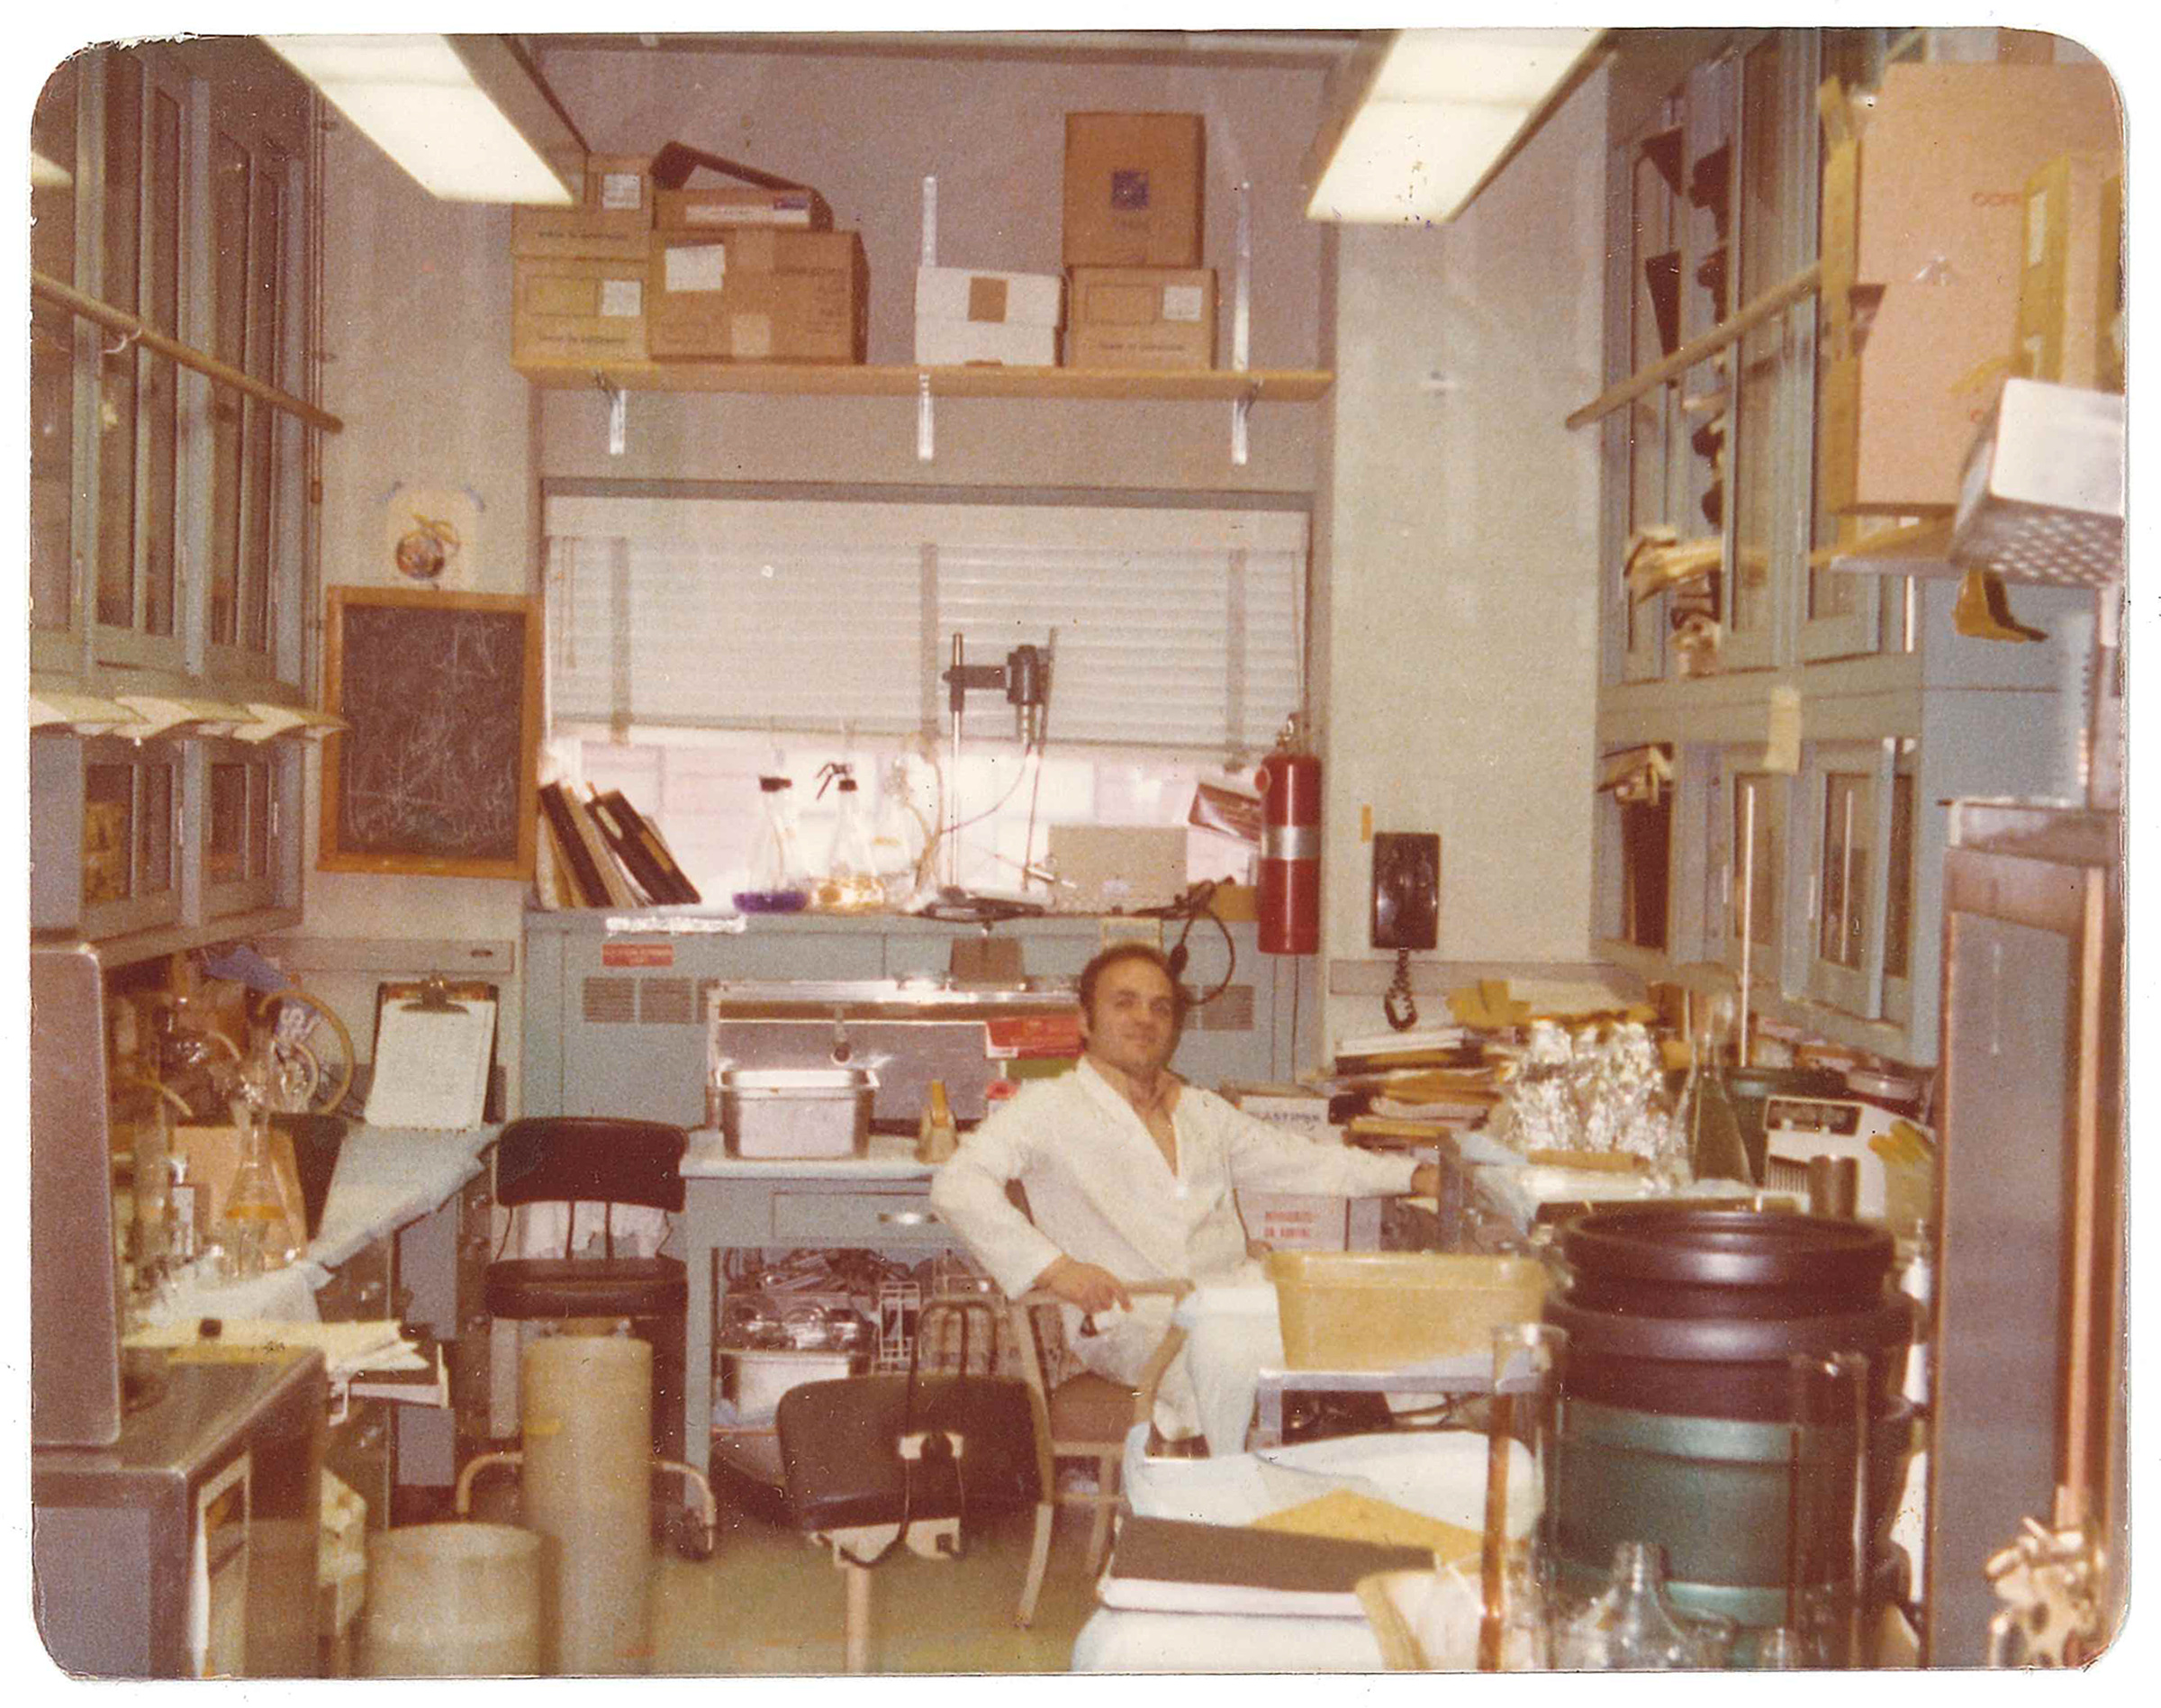 Robert Krug wearing a lab coat, sitting in his lab in the 1970s